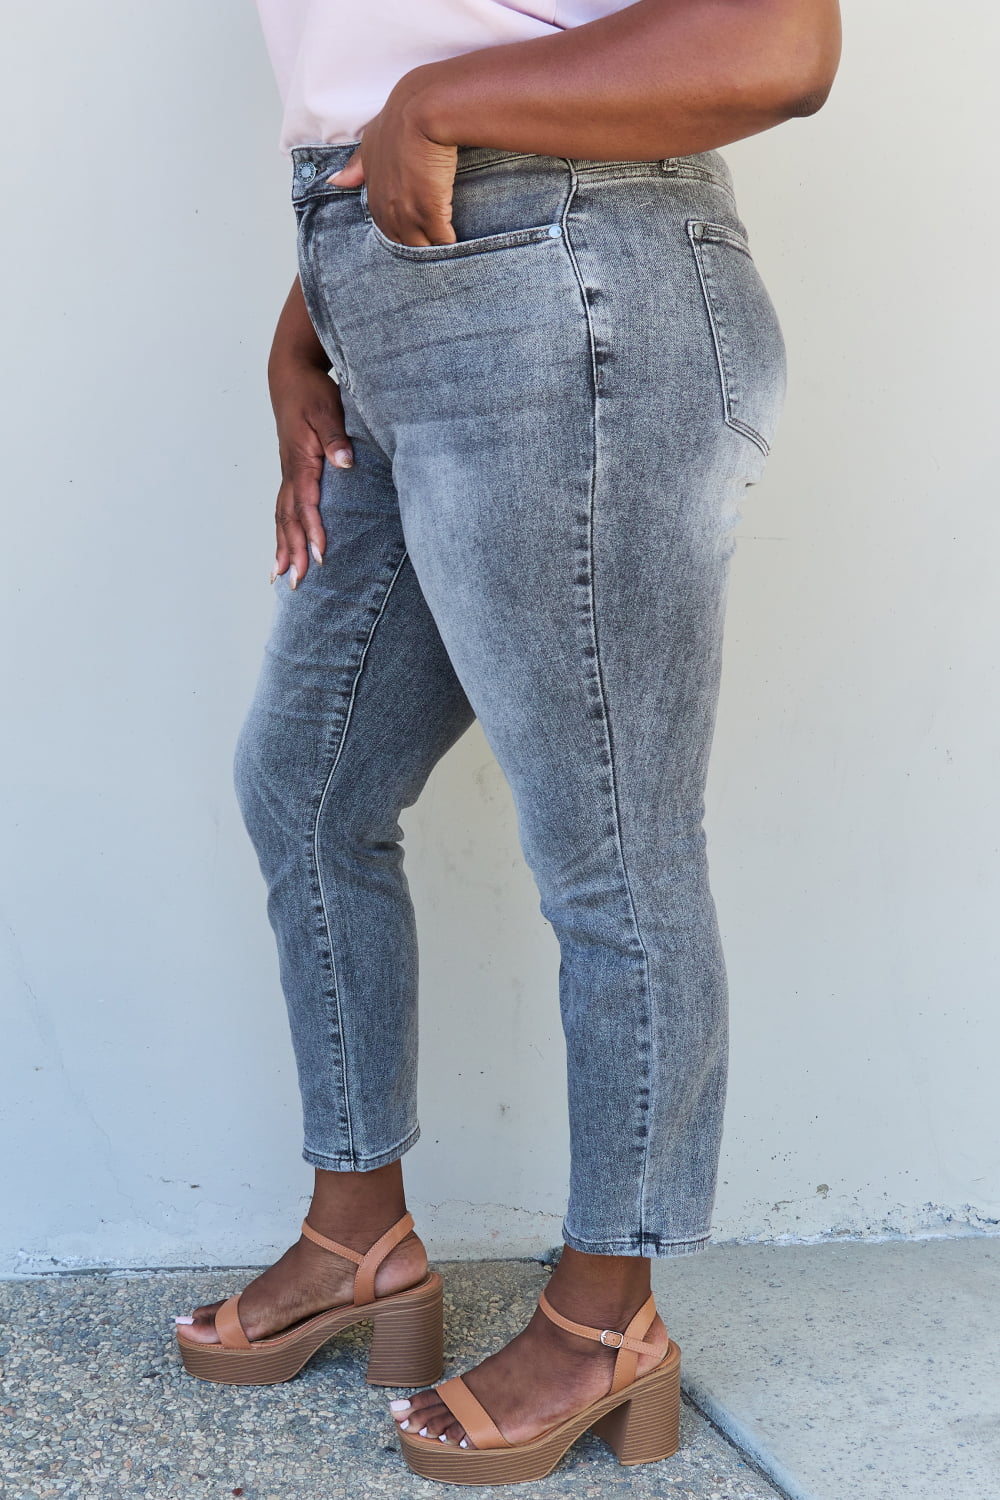 Judy Blue Racquel Full Size High Waisted Stone Wash Slim Fit Jeans  Krazy Heart Designs Boutique   